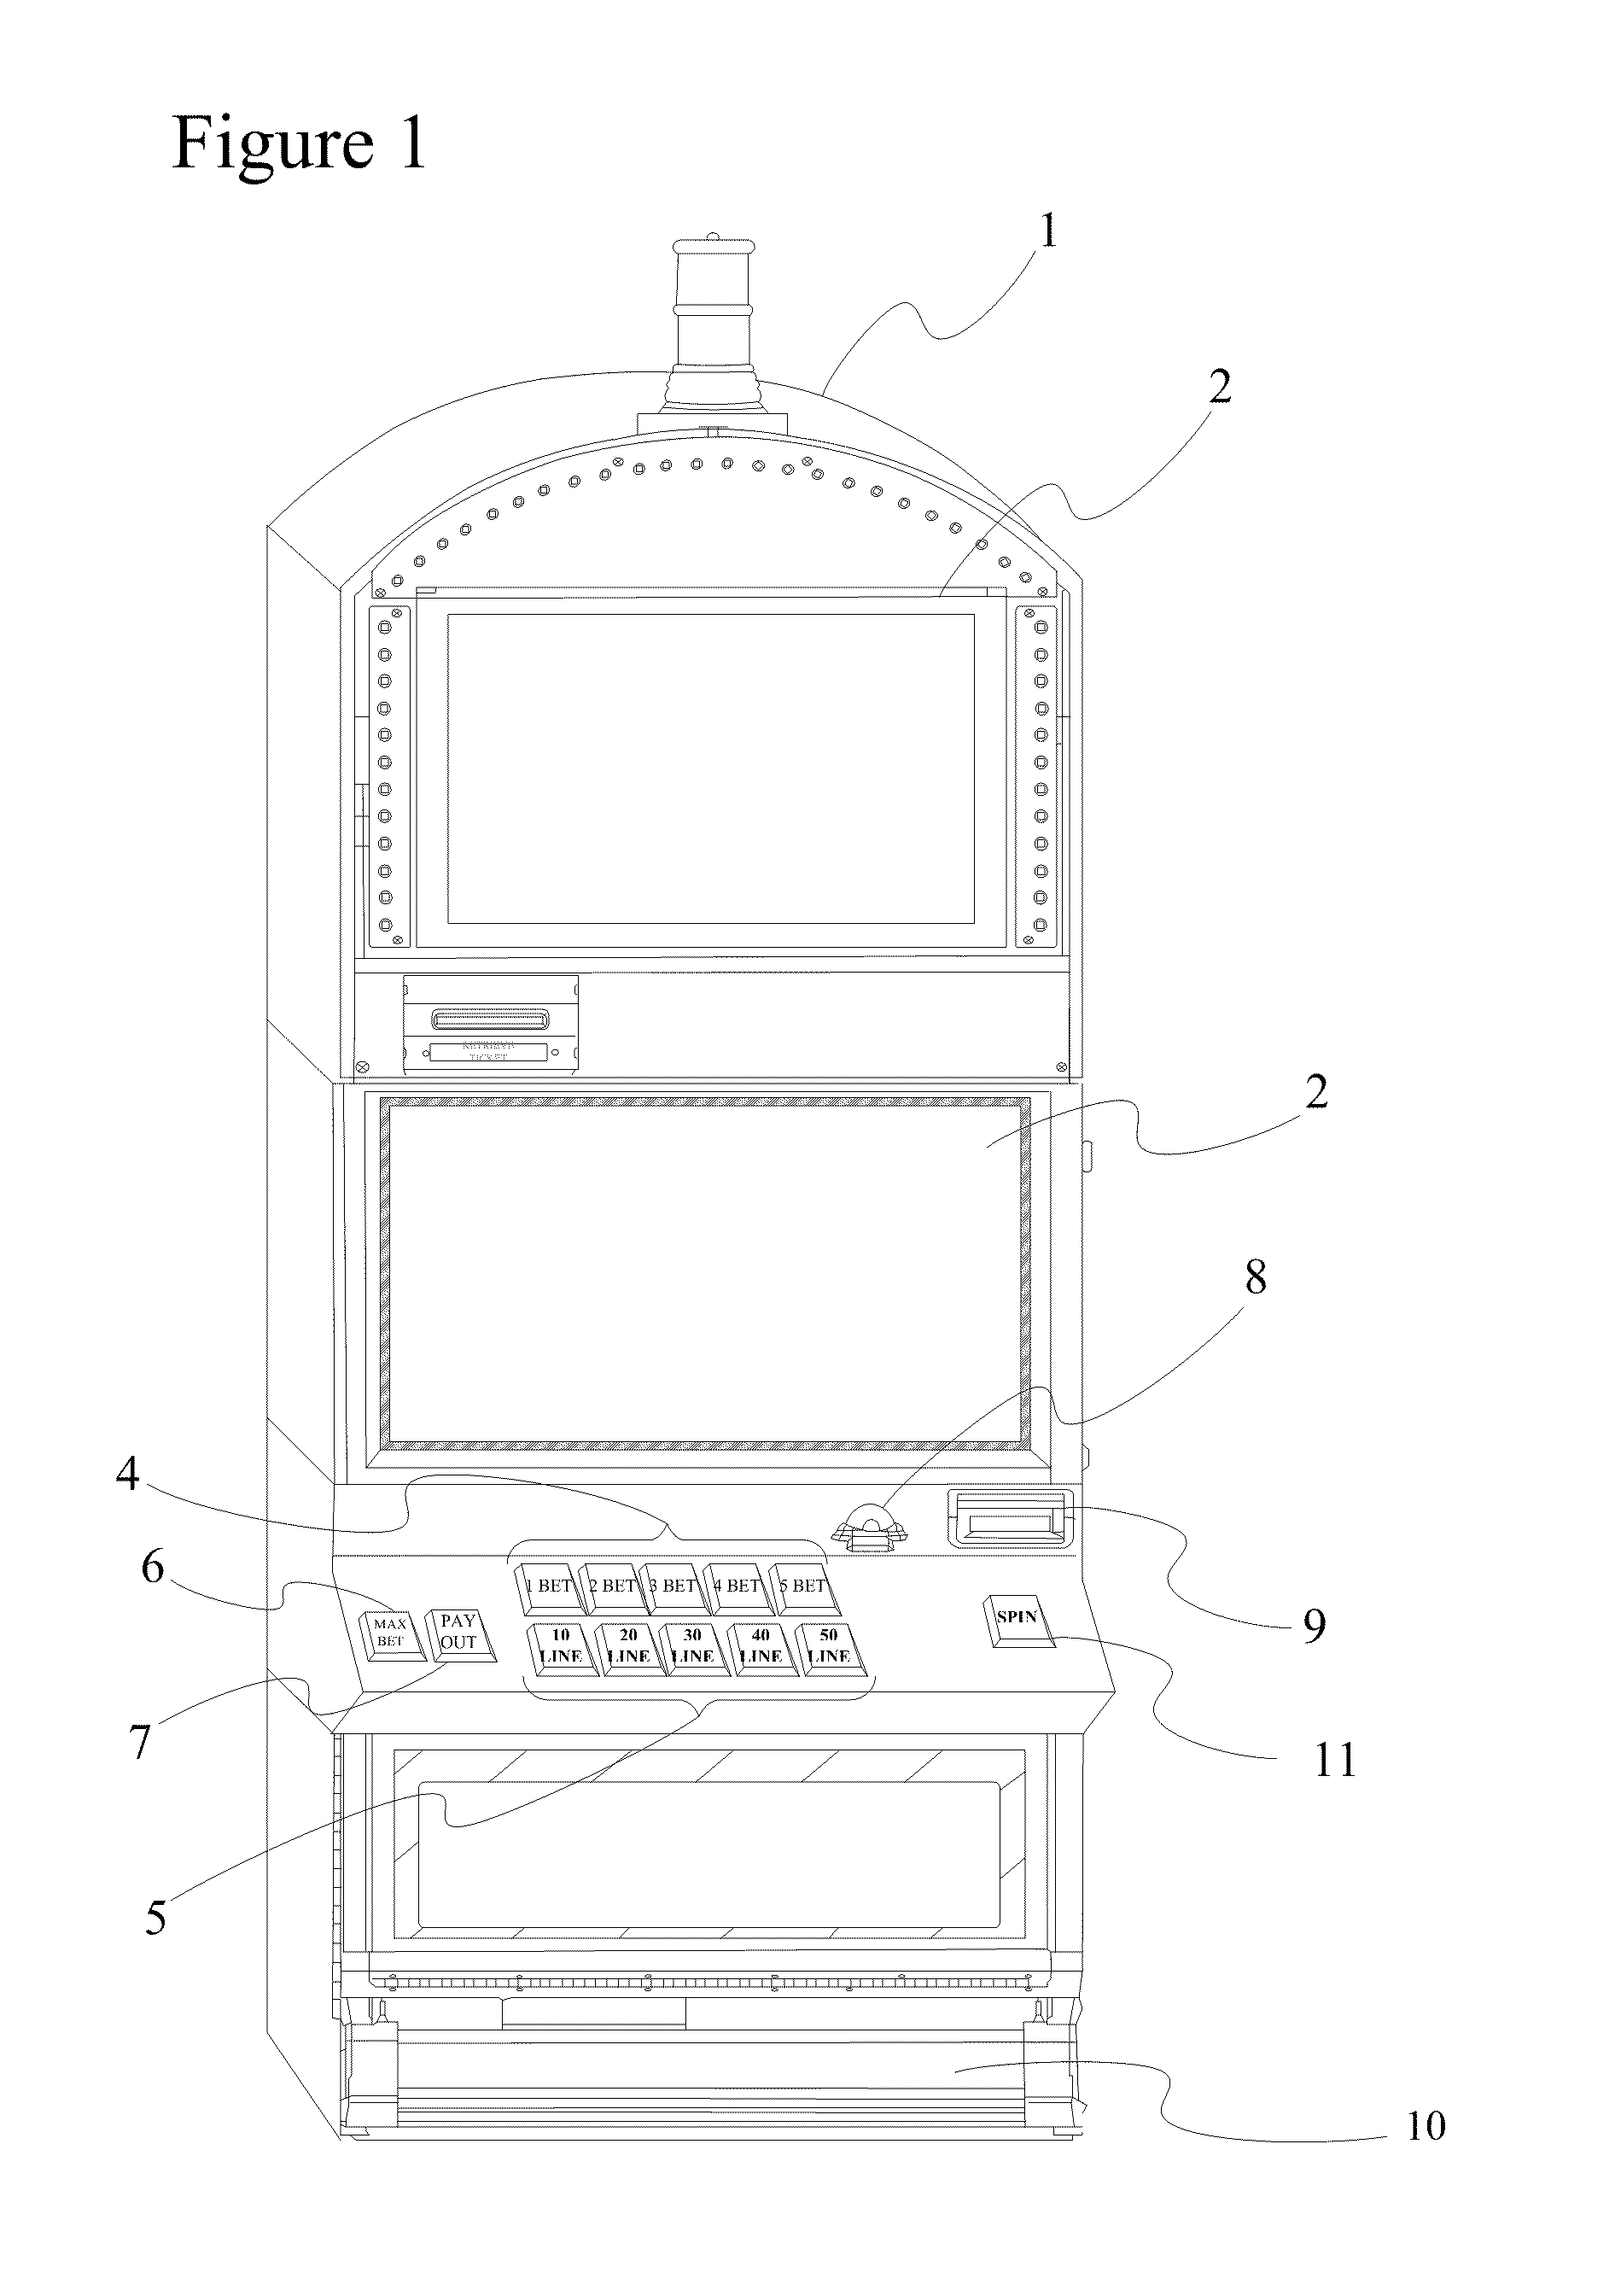 Gaming Machine and System Having Secondary Game